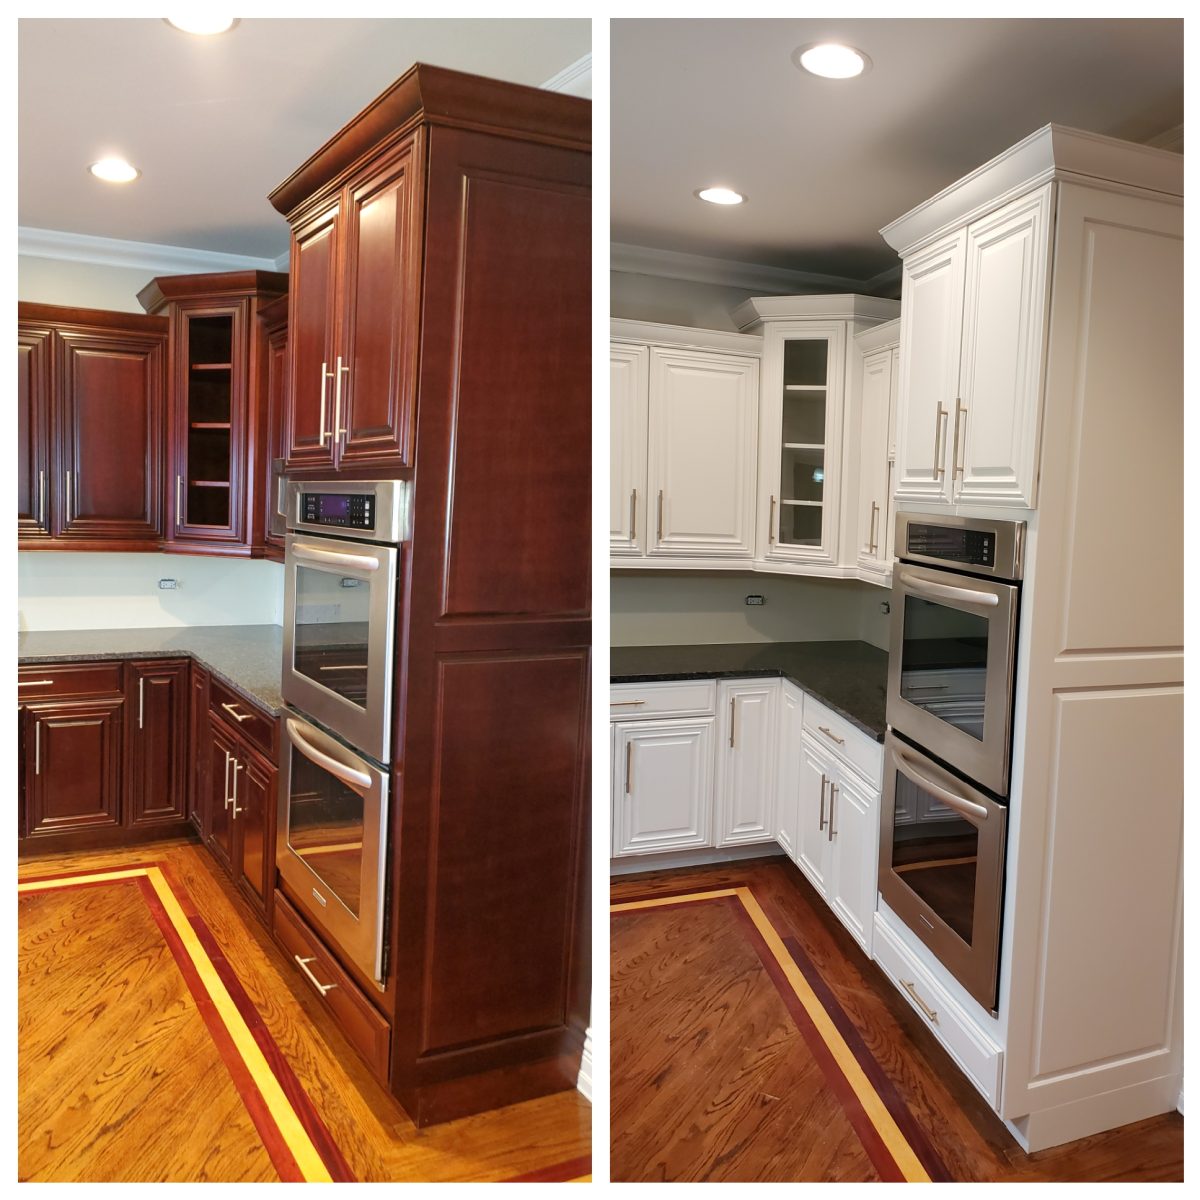 Tips For Painting Cherry Cabinets White, Painting Stained Cabinets White